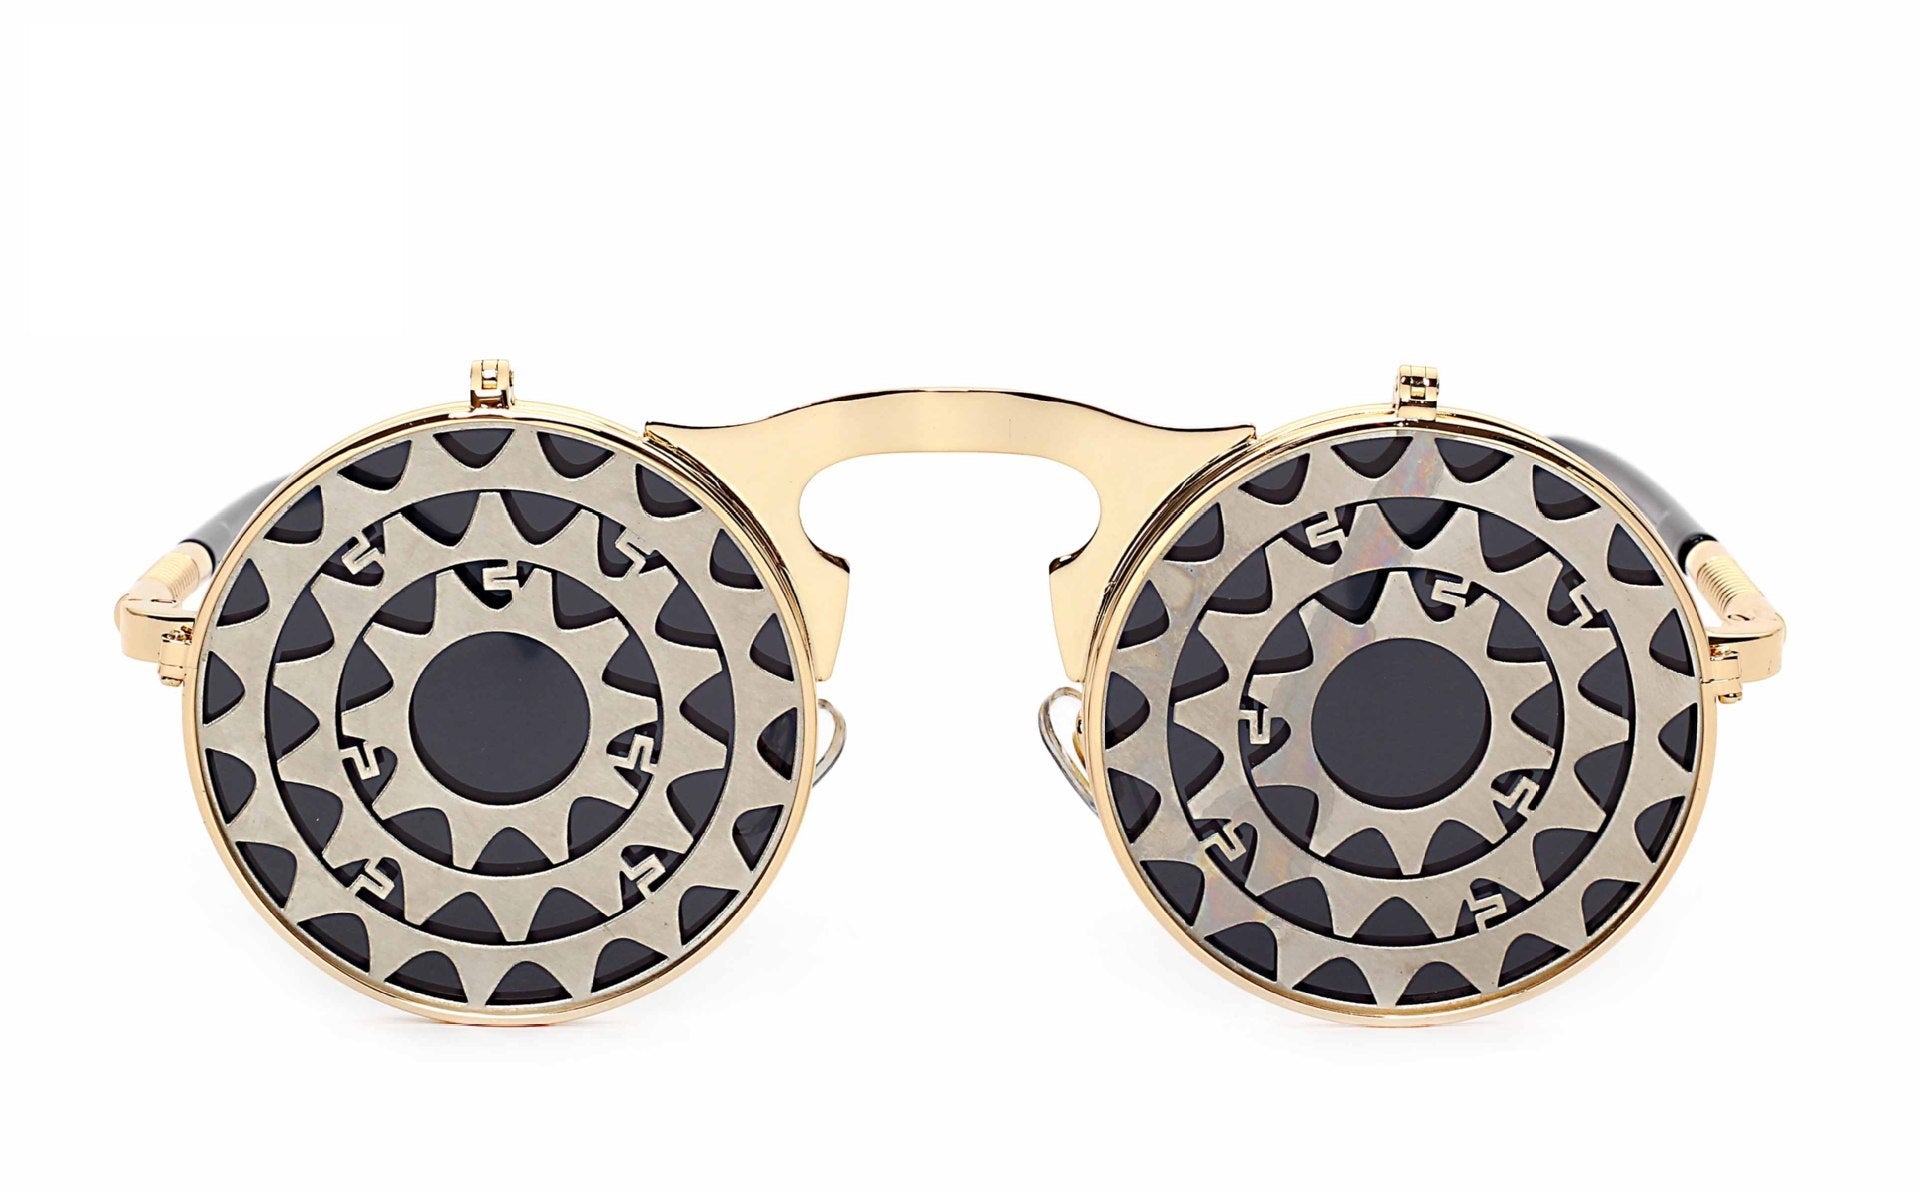 A pair of Maramalive™ Steampunk Flip Sunglasses with an orange and gold design.